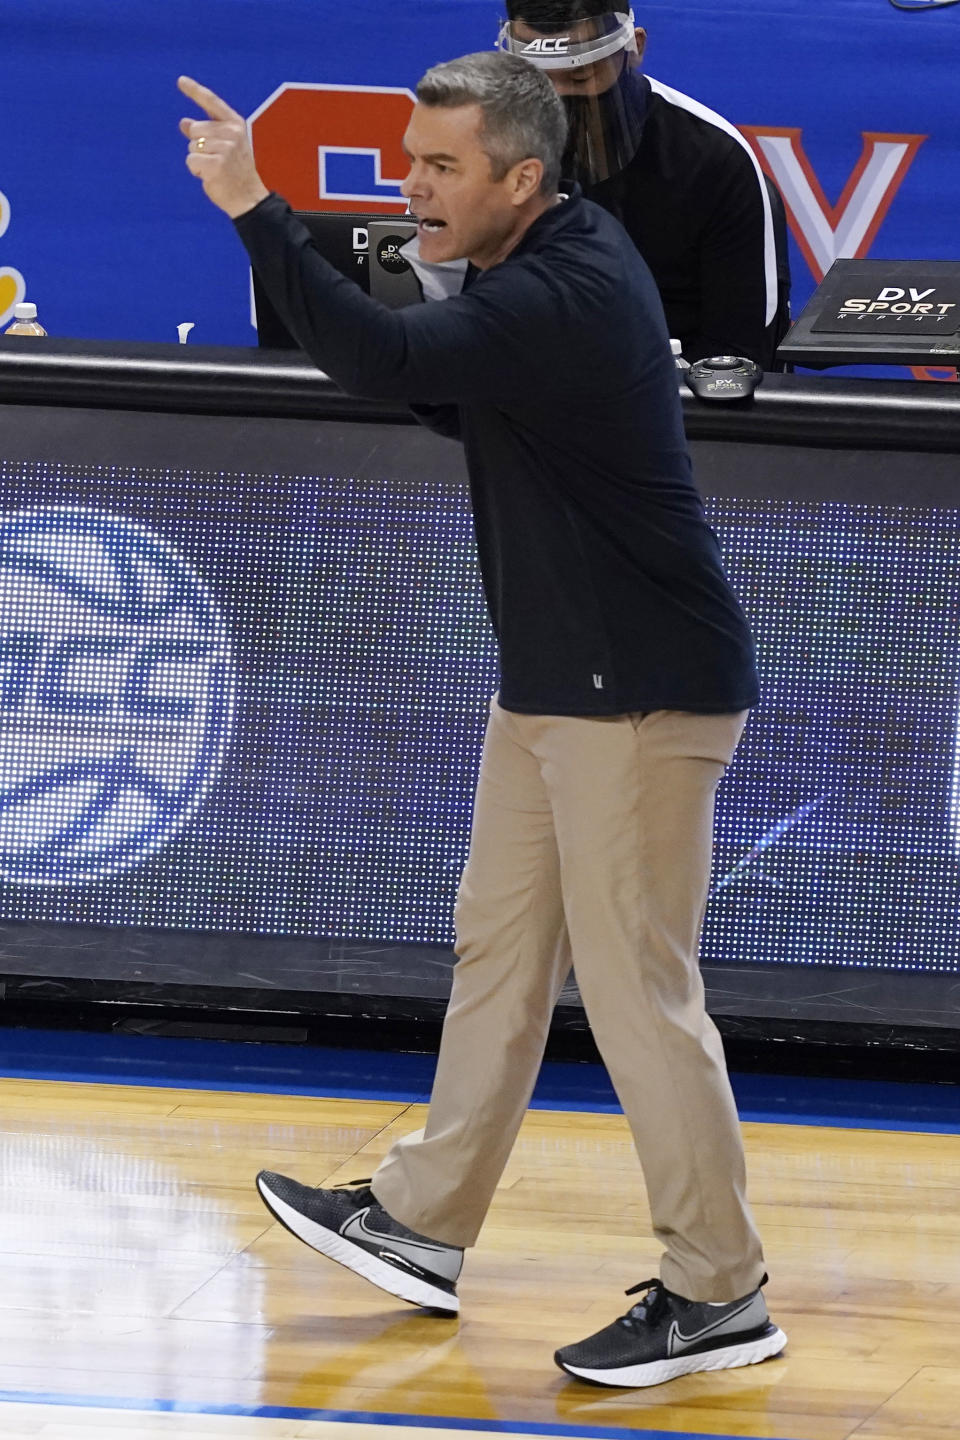 Virginia head coach Tony Bennett directs his team during the second half of an NCAA college basketball game against Syracuse in the quarterfinal round of the Atlantic Coast Conference tournament in Greensboro, N.C., Thursday, March 11, 2021. (AP Photo/Gerry Broome)